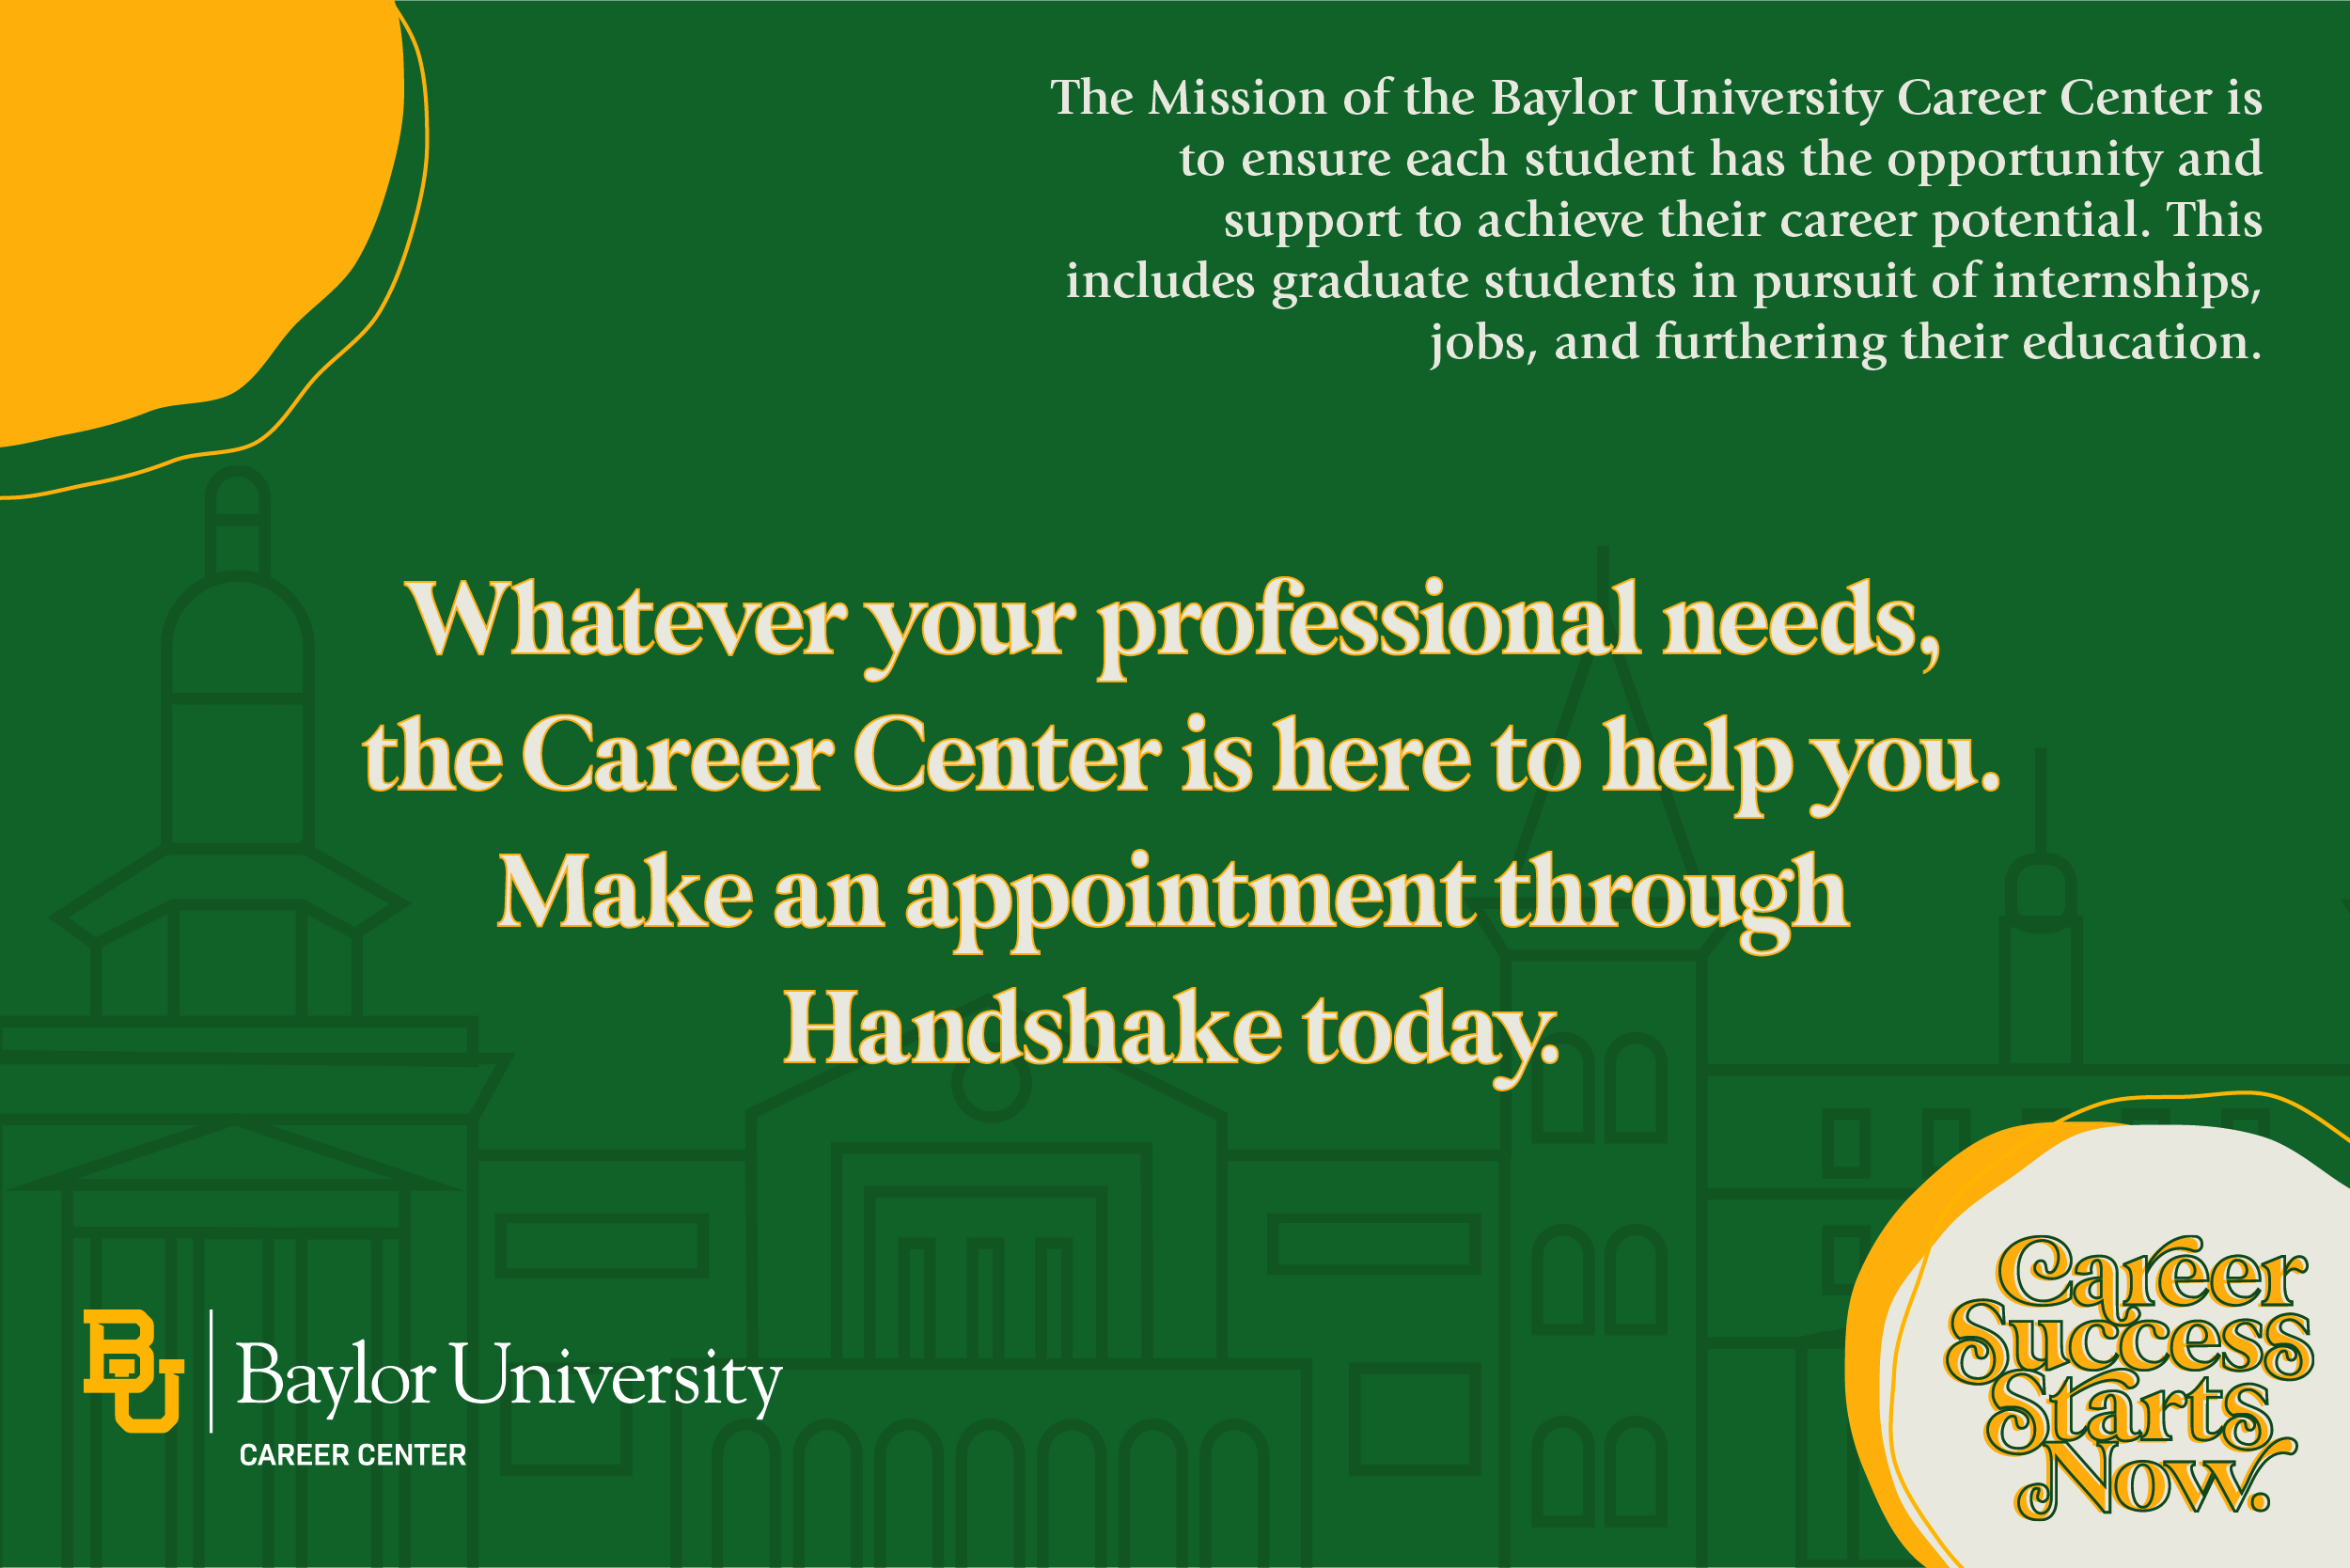 The mission of the Baylor University Career Center is to ensure each student has the opportunity and support to achieve their career potential. This includes graduate students in pursuit of internships, jobs, and furthering their education.  Whatever your professional needs, the Career Center is here to help you. Make an appointment through Handshake today. 